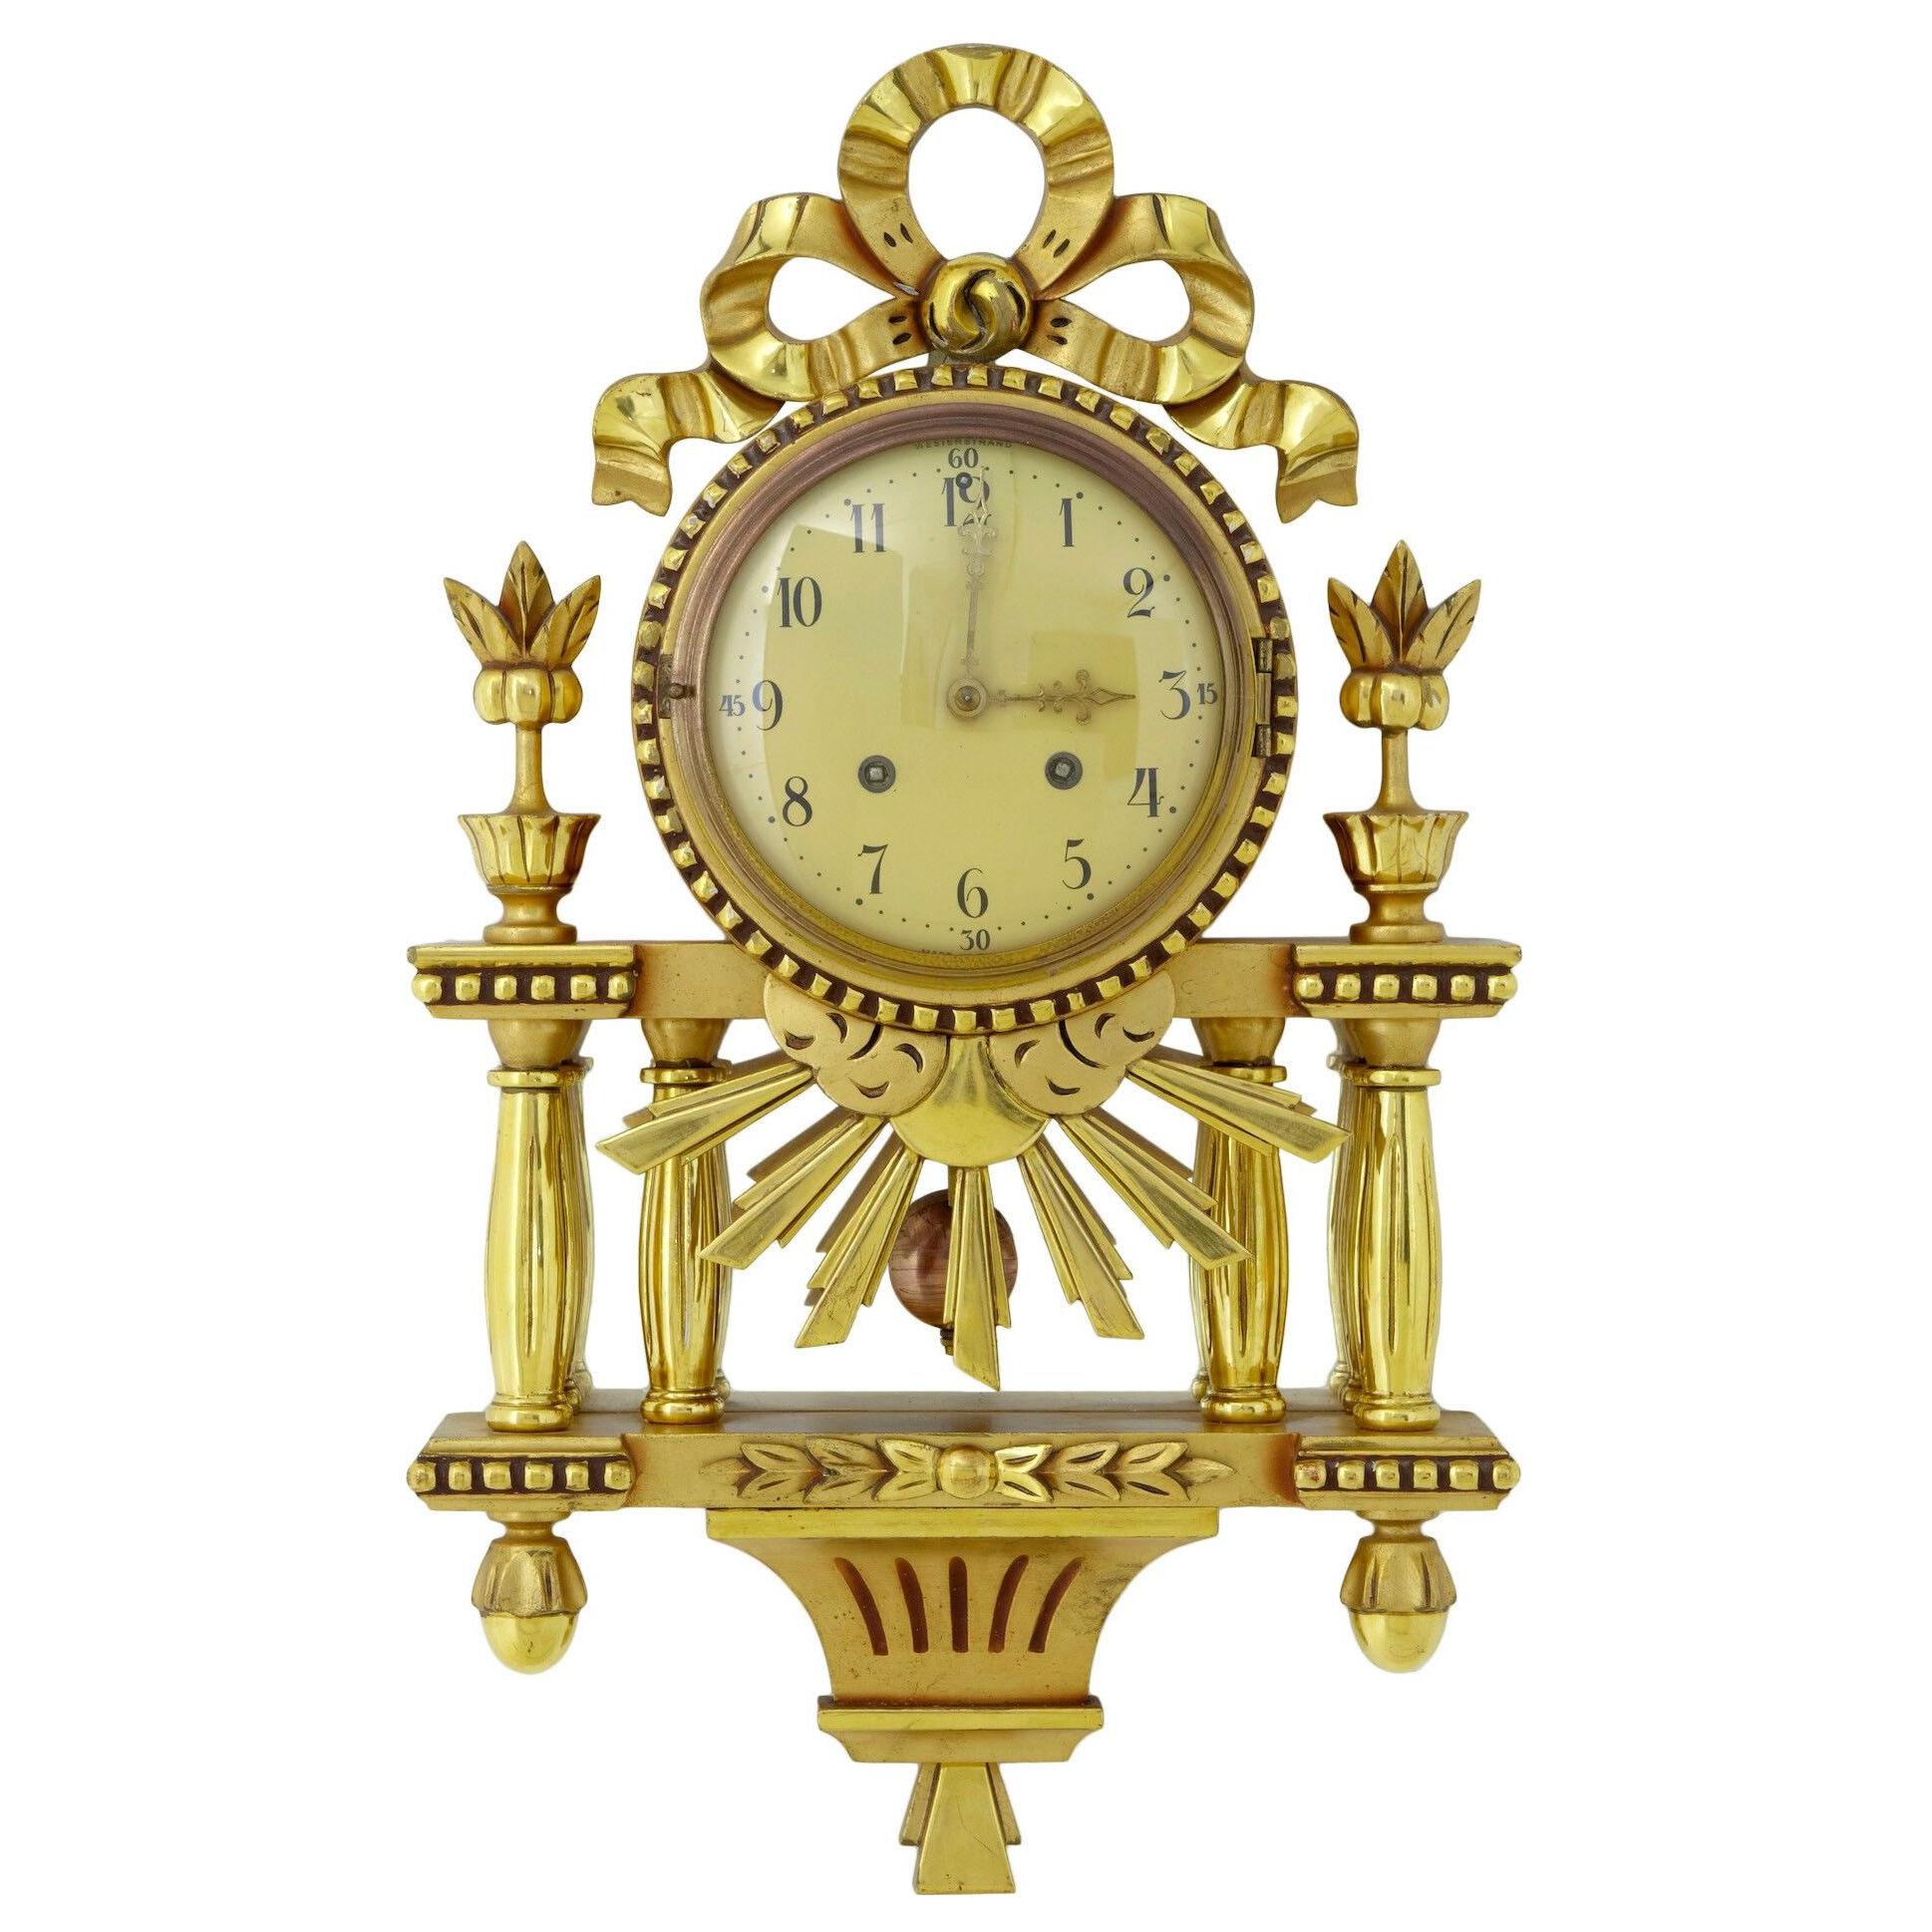 1940's SWEDISH GILT ORNATE WALL CLOCK BY WESTERSTRAND